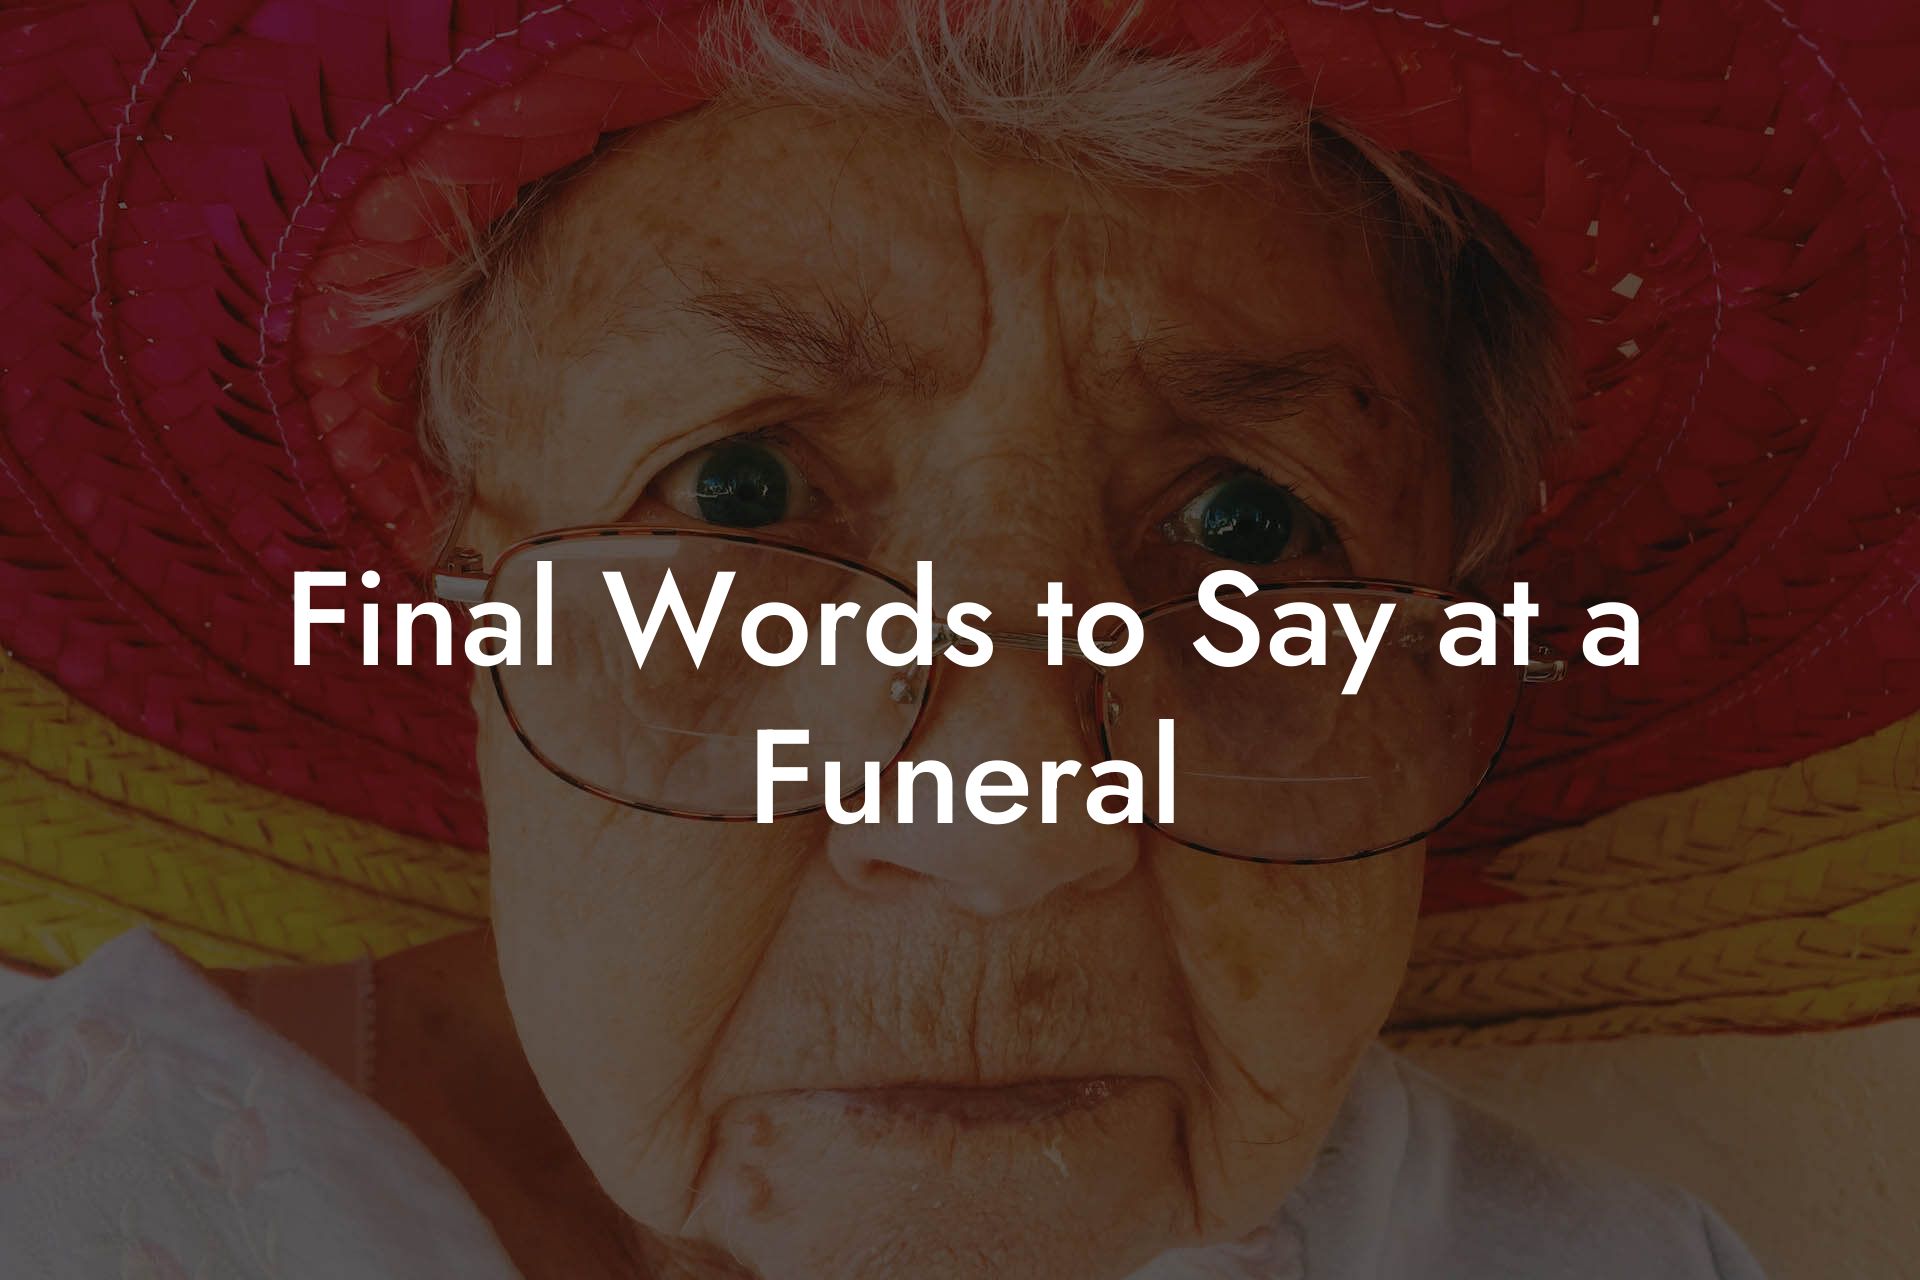 Final Words to Say at a Funeral